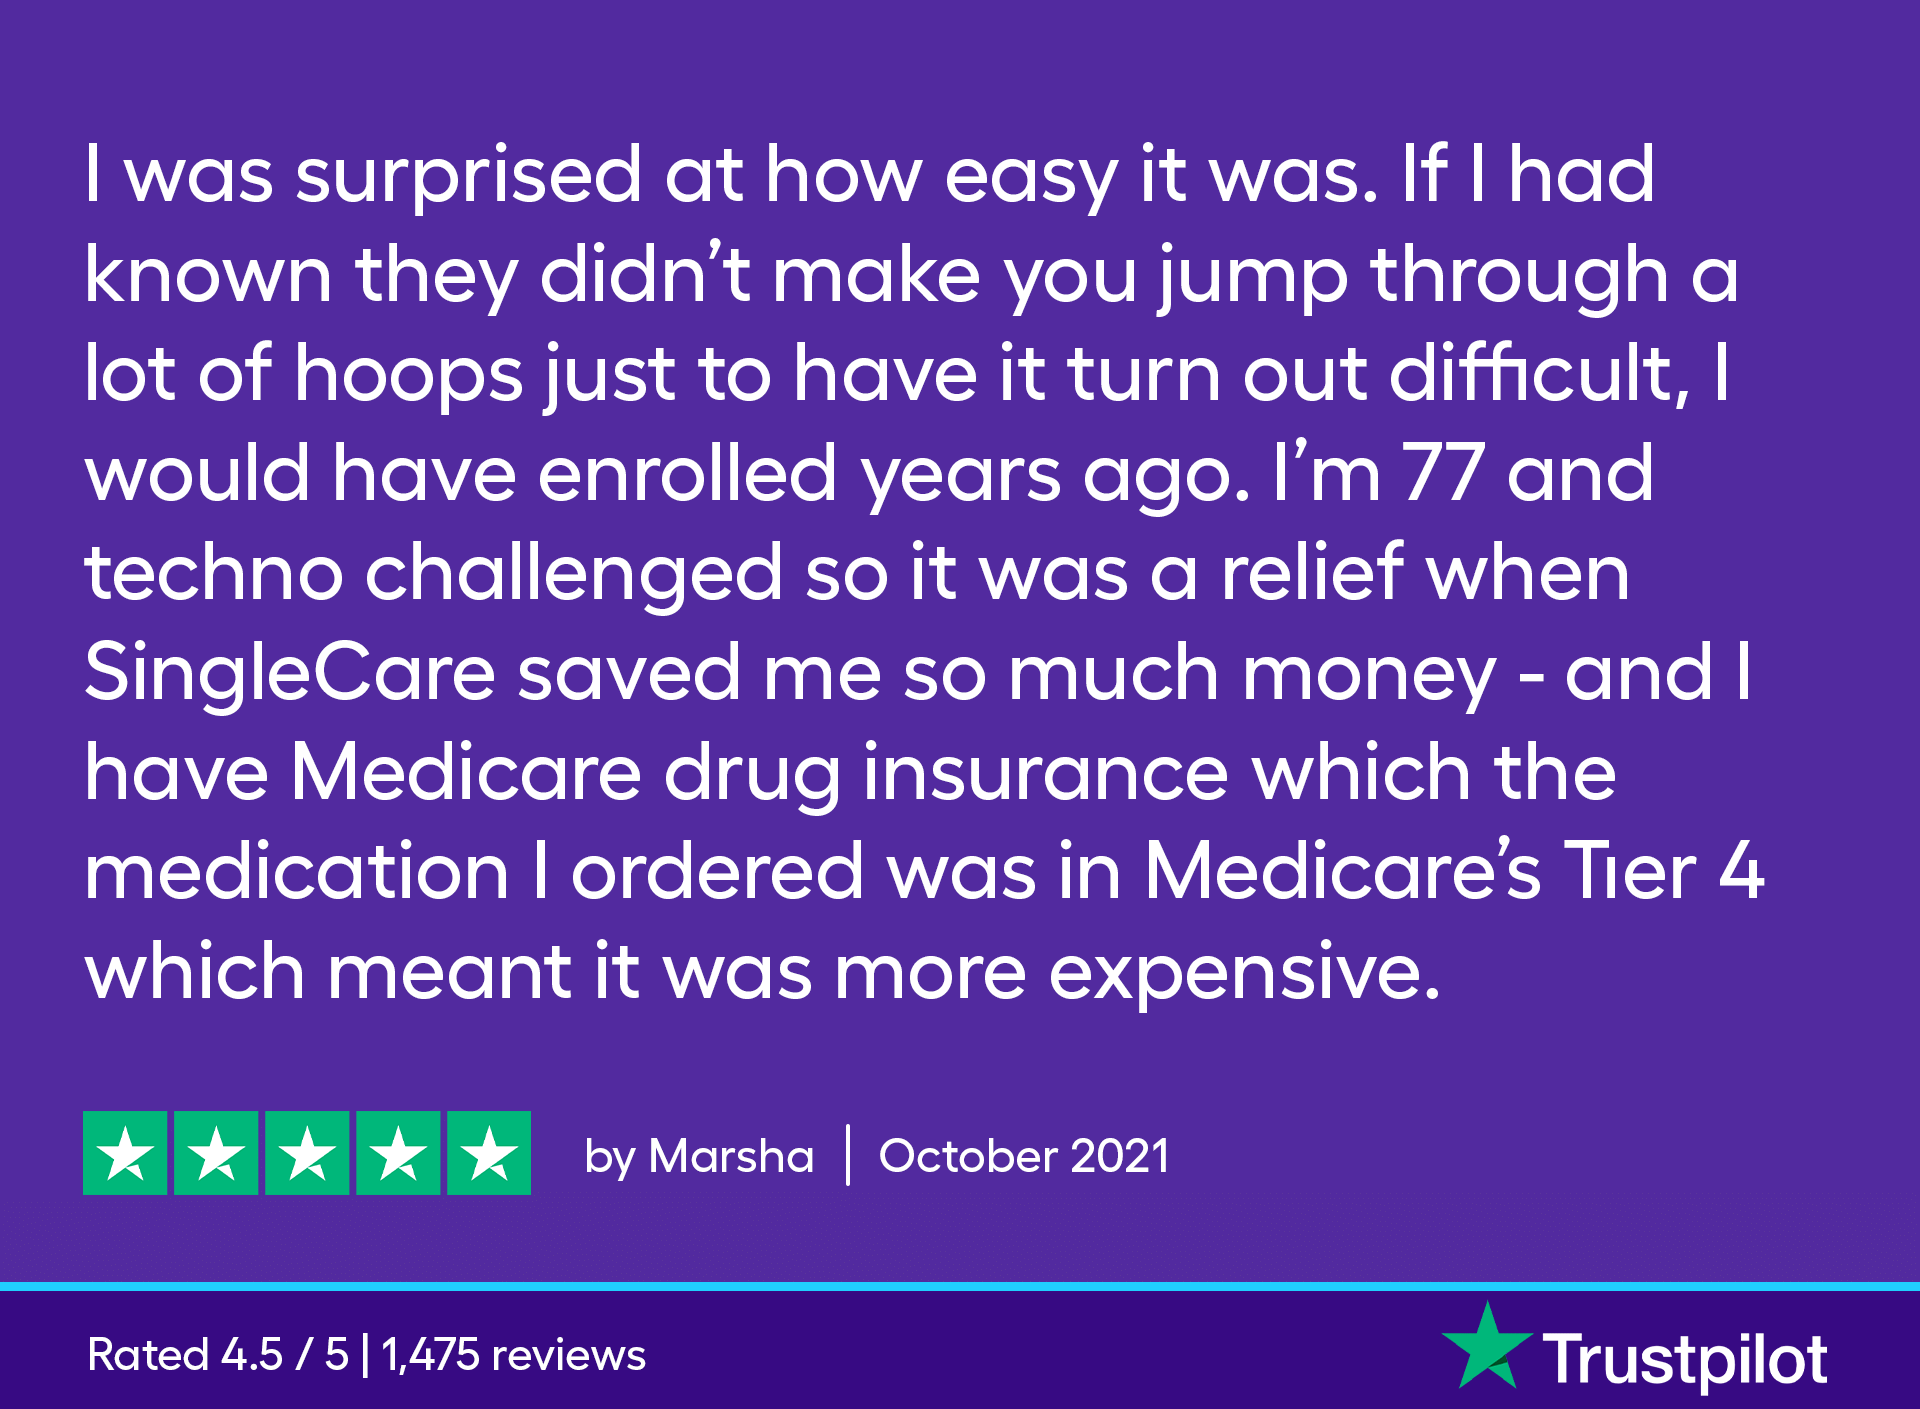 I was surprised at how easy it was. If I had known they didn't make you jump through a lot of hoops just to have it turn out difficult, I would have enrolled years ago. I'm 77 and techno challenged so it was a relief when SingleCare saved me so much money - and I have Medicare drug insurance which the medication I ordered was in Medicare's Tier 4 which meant it was more expensive.